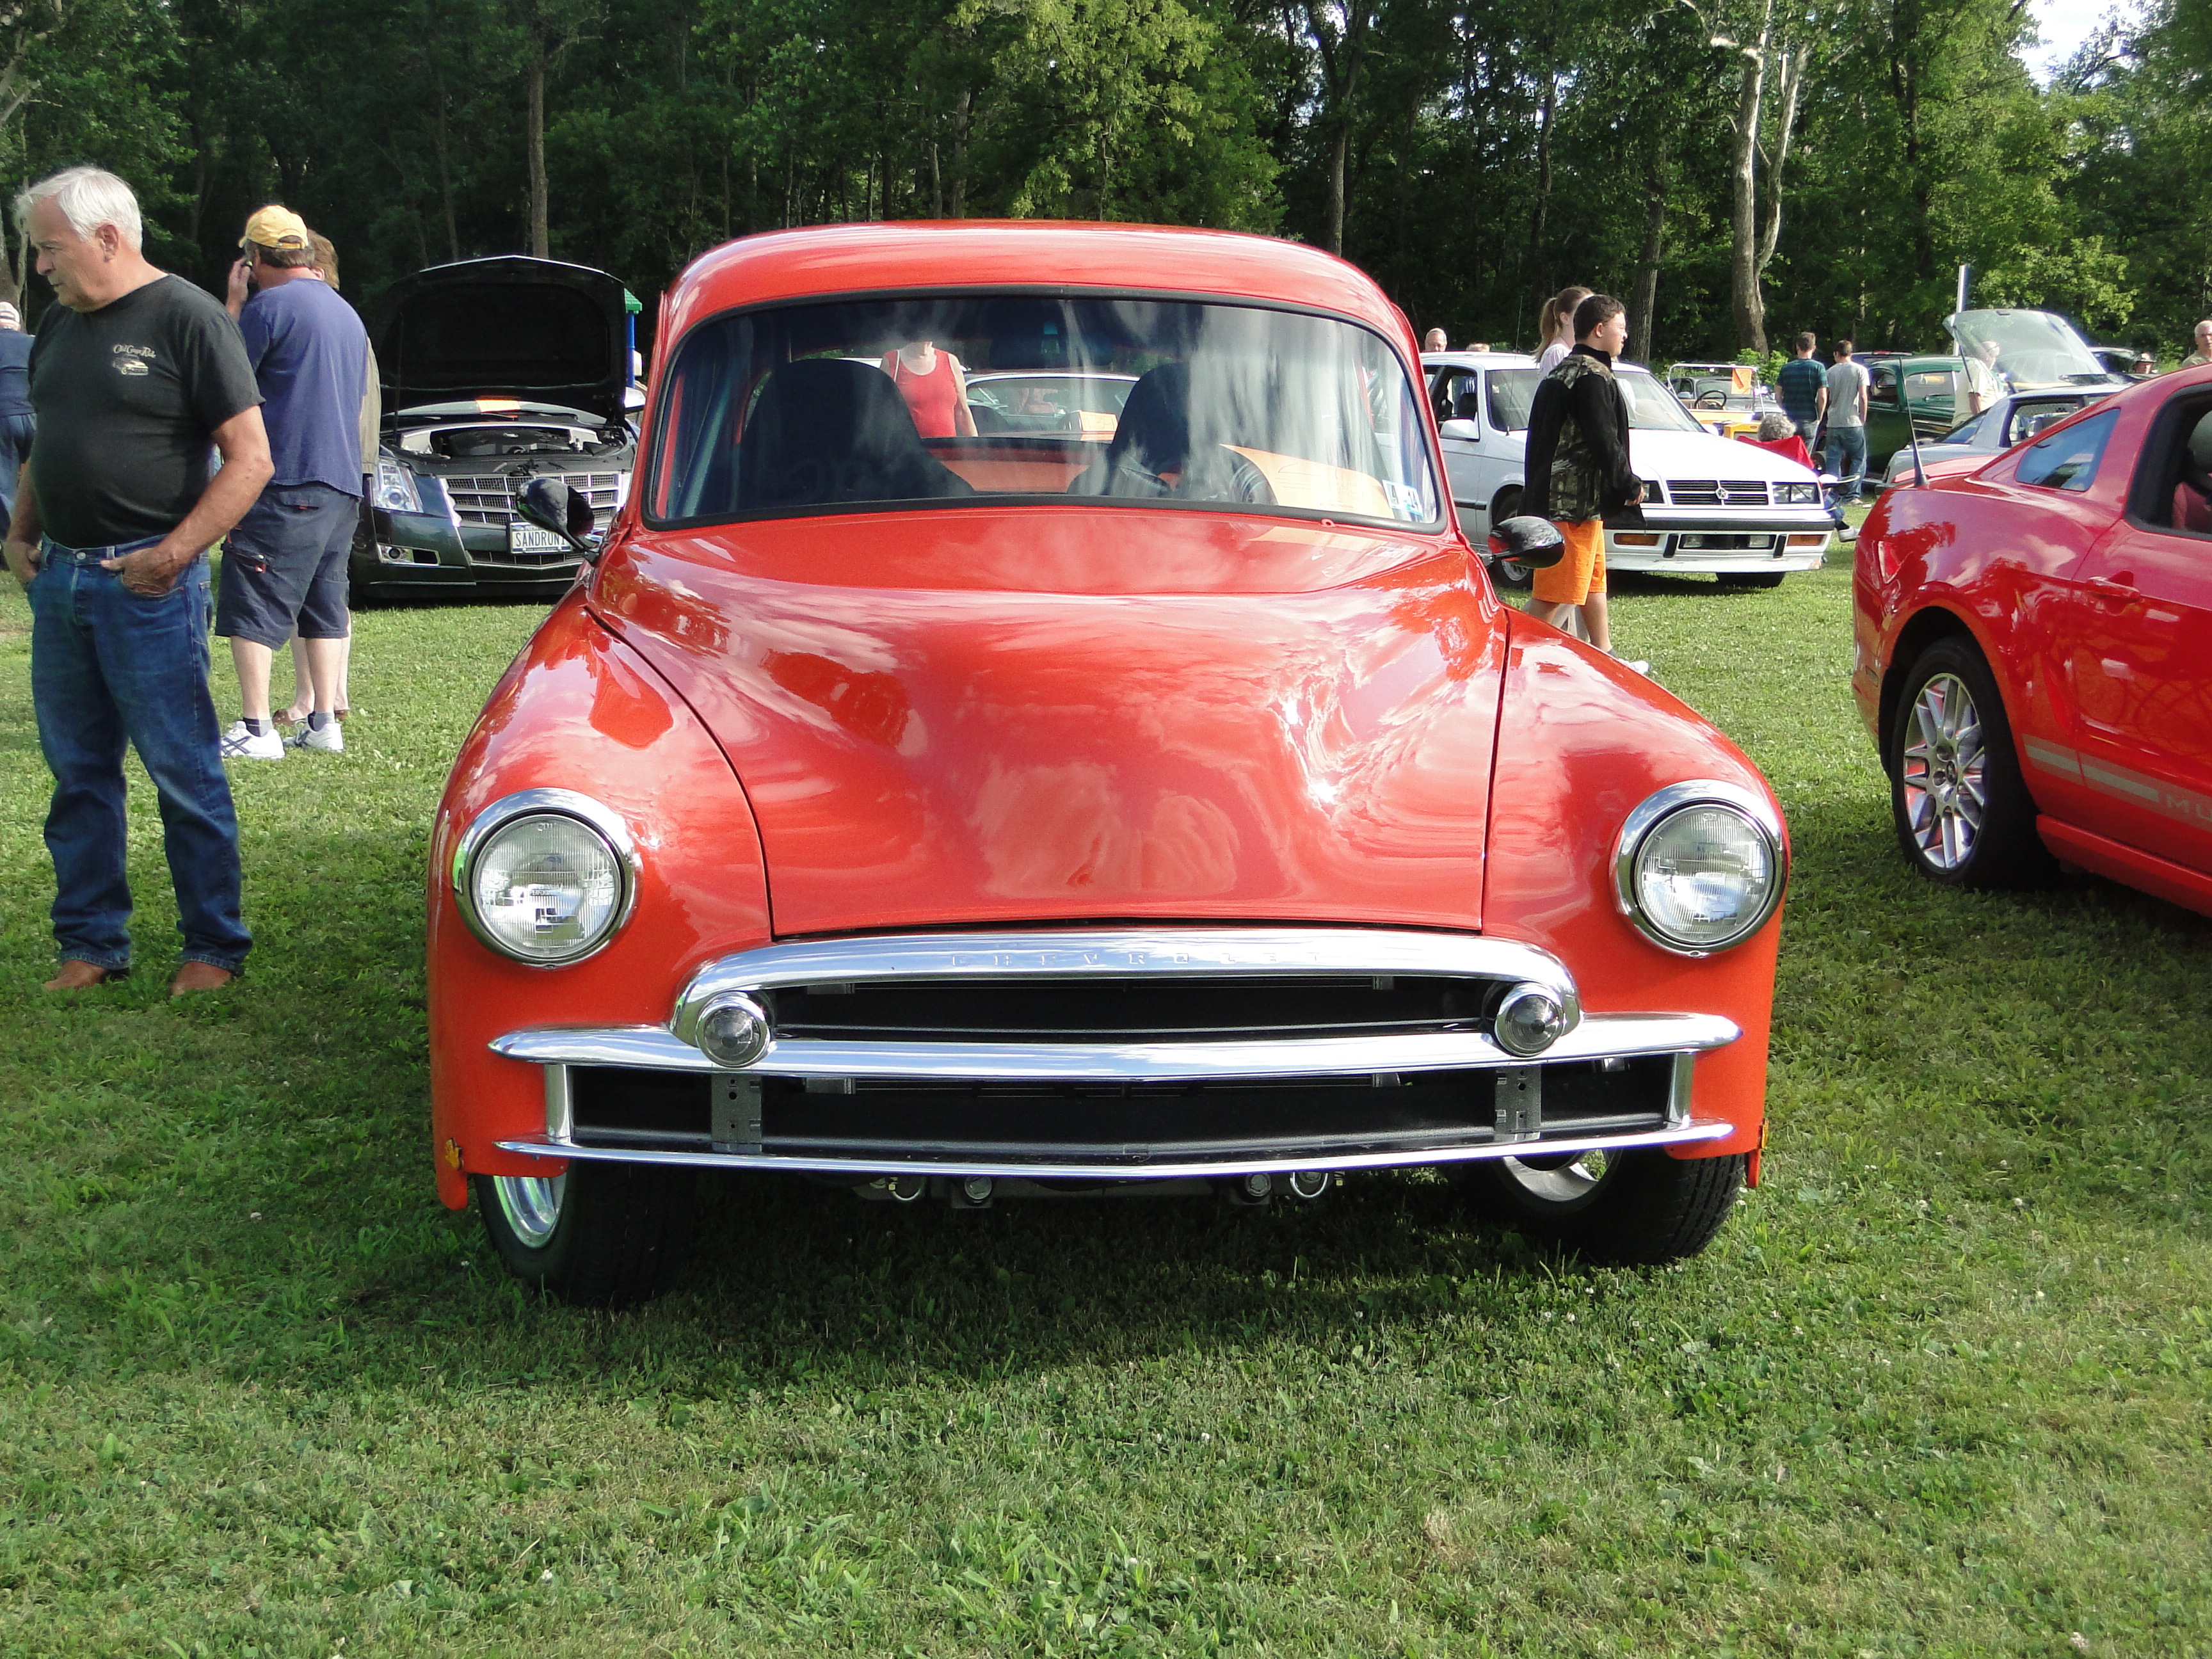 12th Annual Waverly Car and Truck Show coming soon